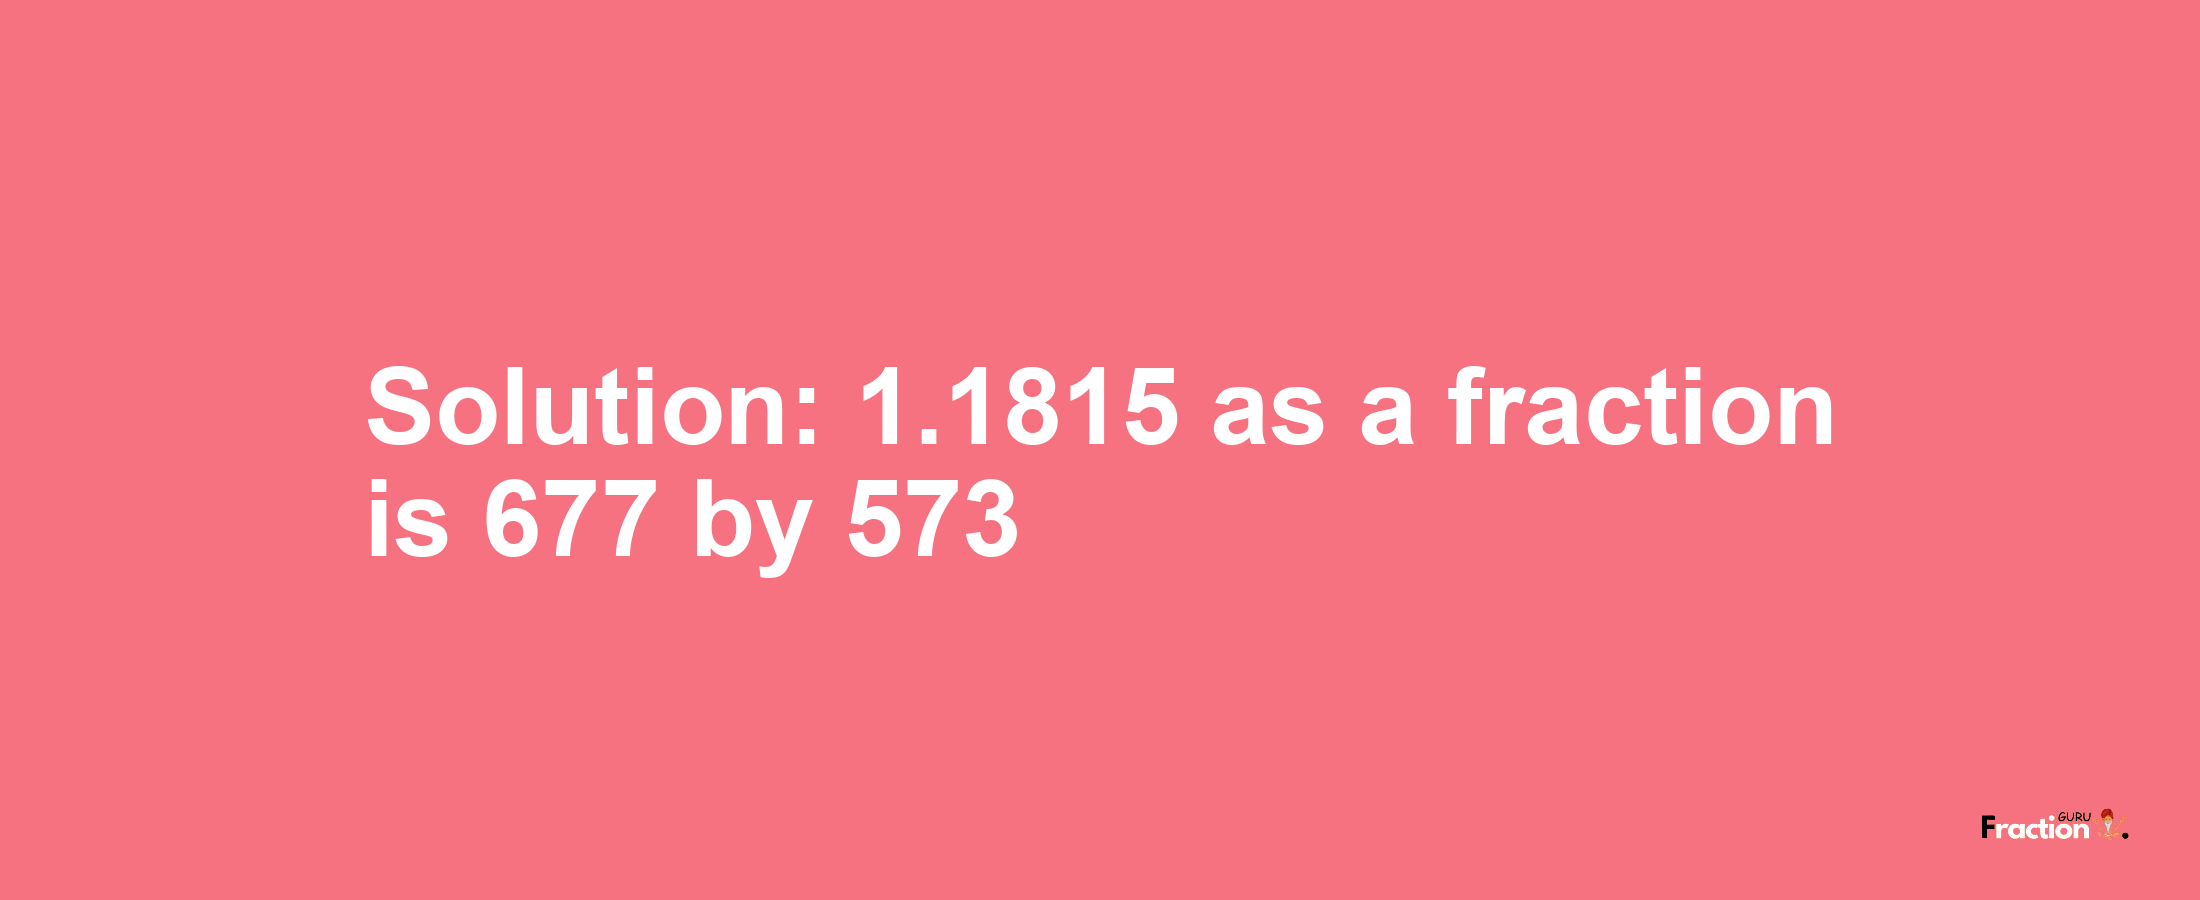 Solution:1.1815 as a fraction is 677/573